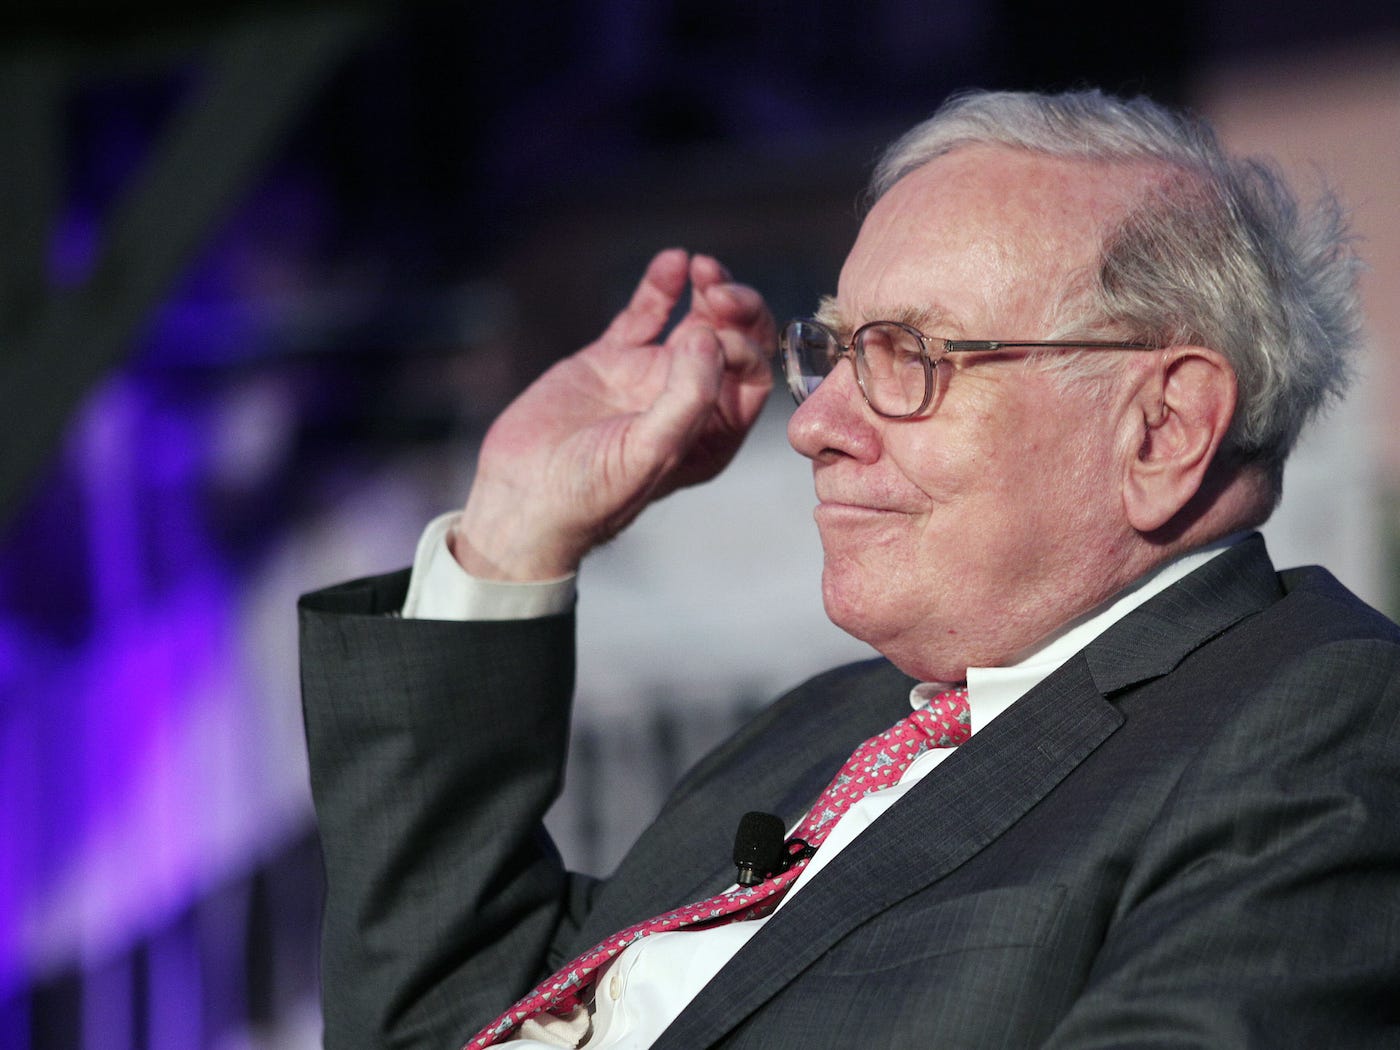 <p>"There are things money can't buy," Buffett once said at a <a href="https://www.fool.com/investing/general/2014/06/08/warren-buffett-finally-explains-why-being-cheap-le.aspx" rel="noopener">shareholder's meeting</a>. "I don't think standard of living equates with cost of living beyond a certain point. My life couldn't be happier. In fact, it'd be worse if I had six or eight houses. So, I have everything I need to have, and I don't need any more because it doesn't make a difference after a point."</p>